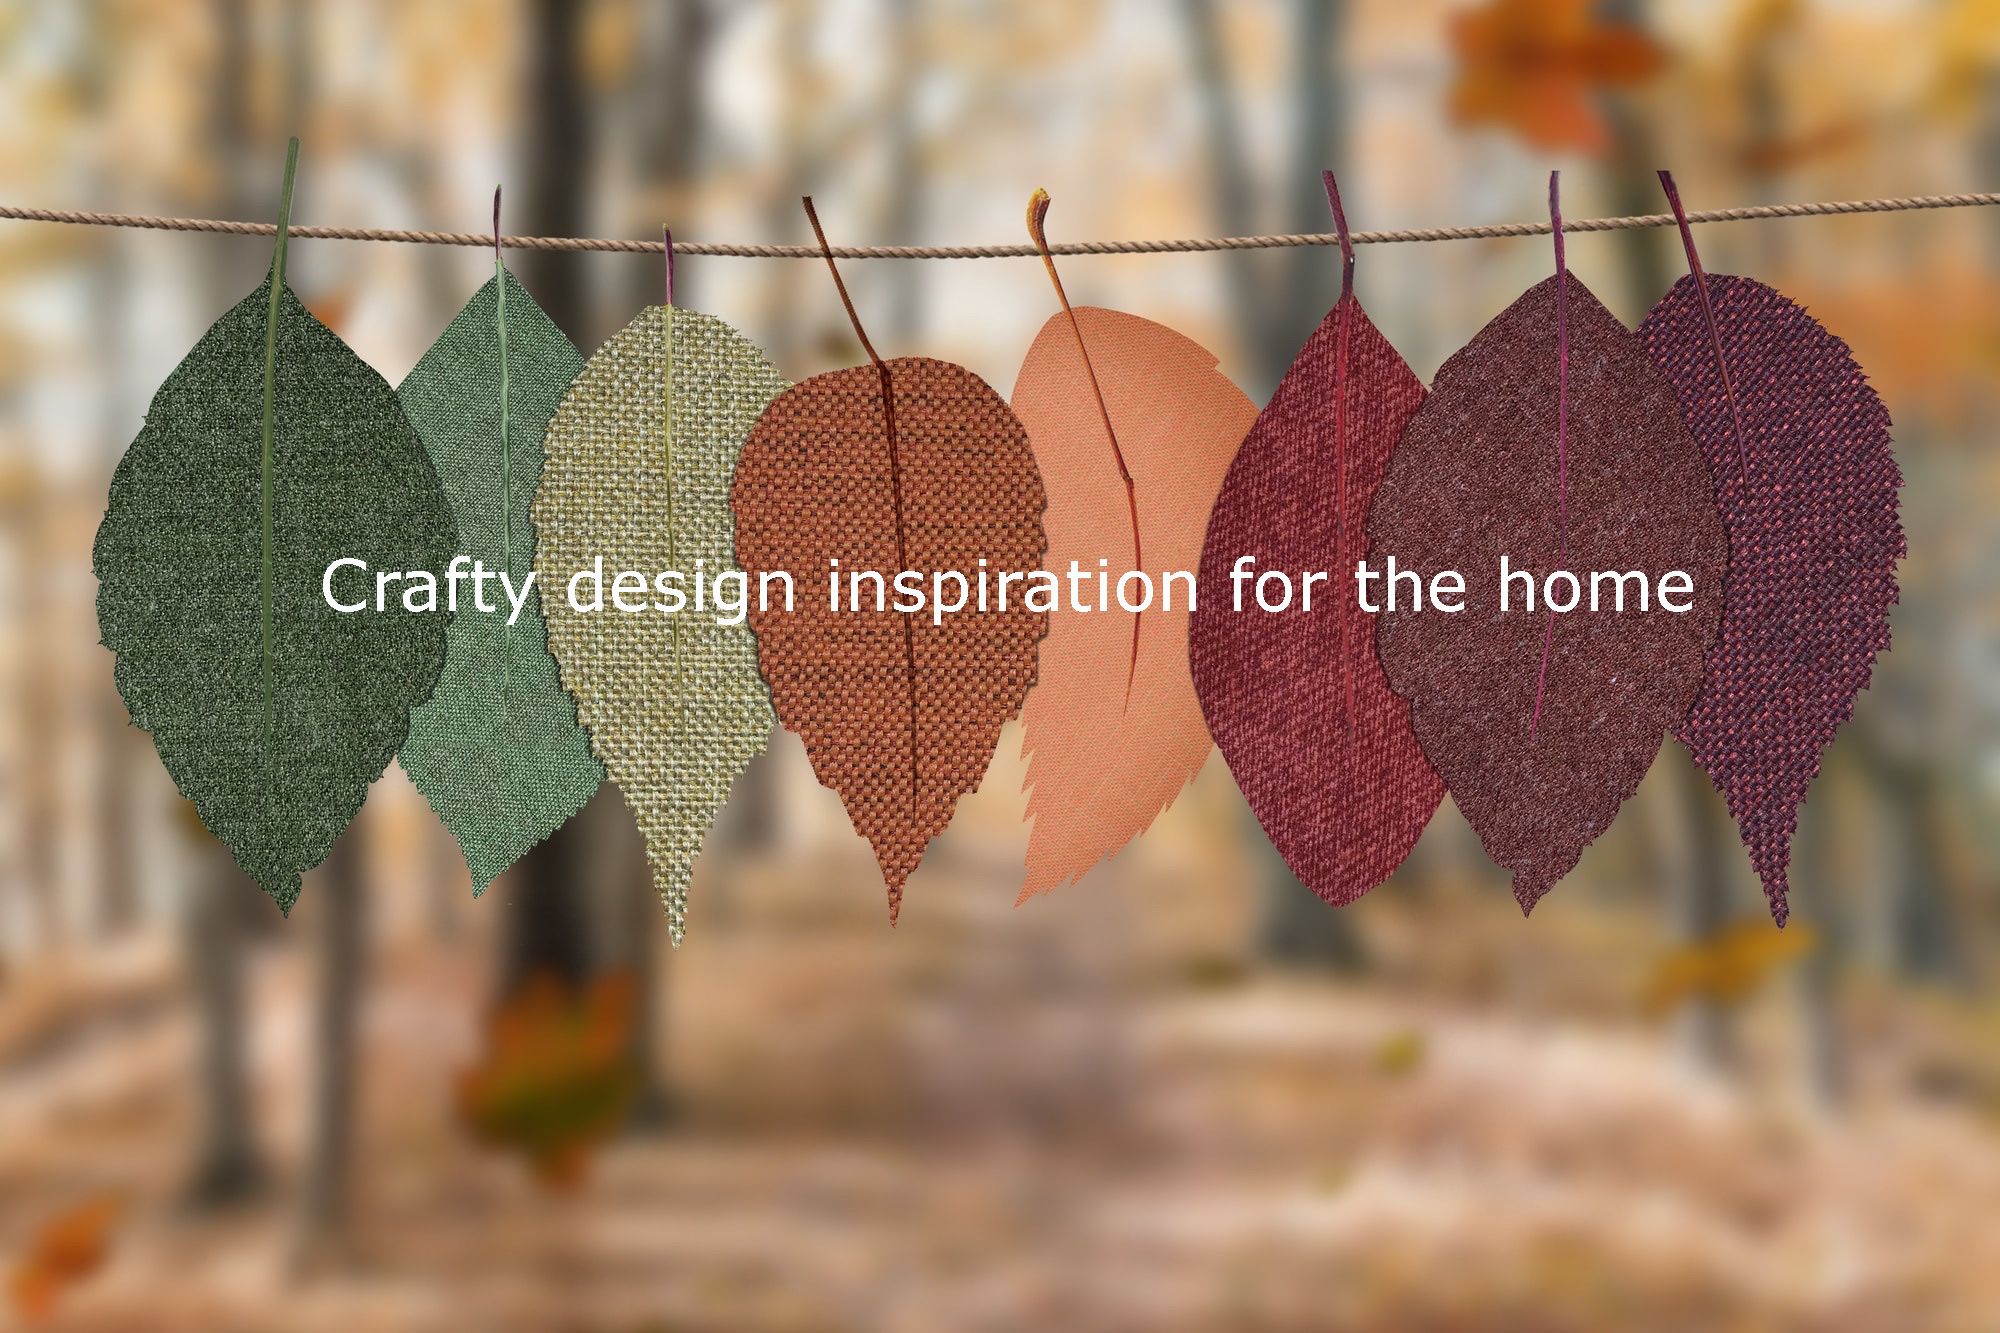 Crafty design inspiration for the home